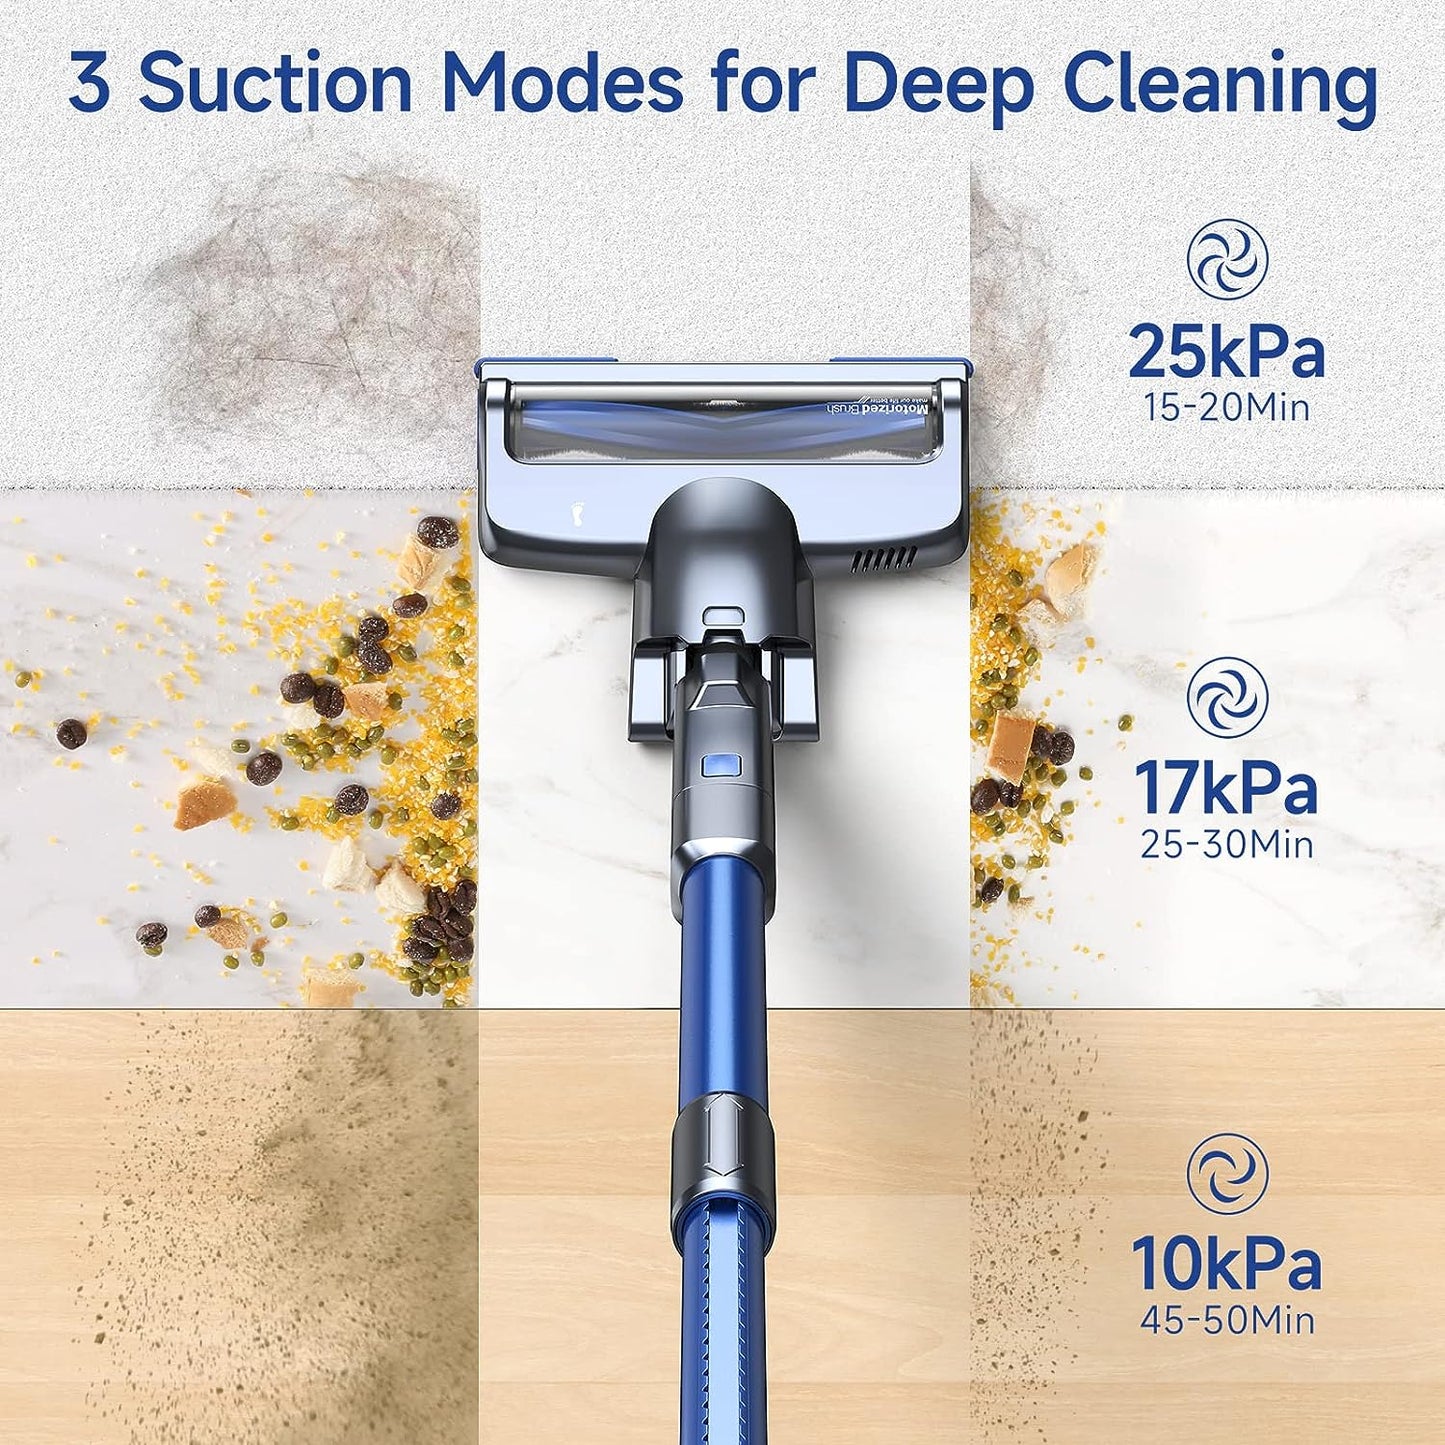 Lubluelu Vacuum Cleaner,25Kpa 235W Cordless Vacuum Cleaner with Self-Standing,Up to 55mins Detachable Battery,6 in 1 Lightweight Stick Vacuum Cordless for Hard Floor,Carpet,Pet Hair